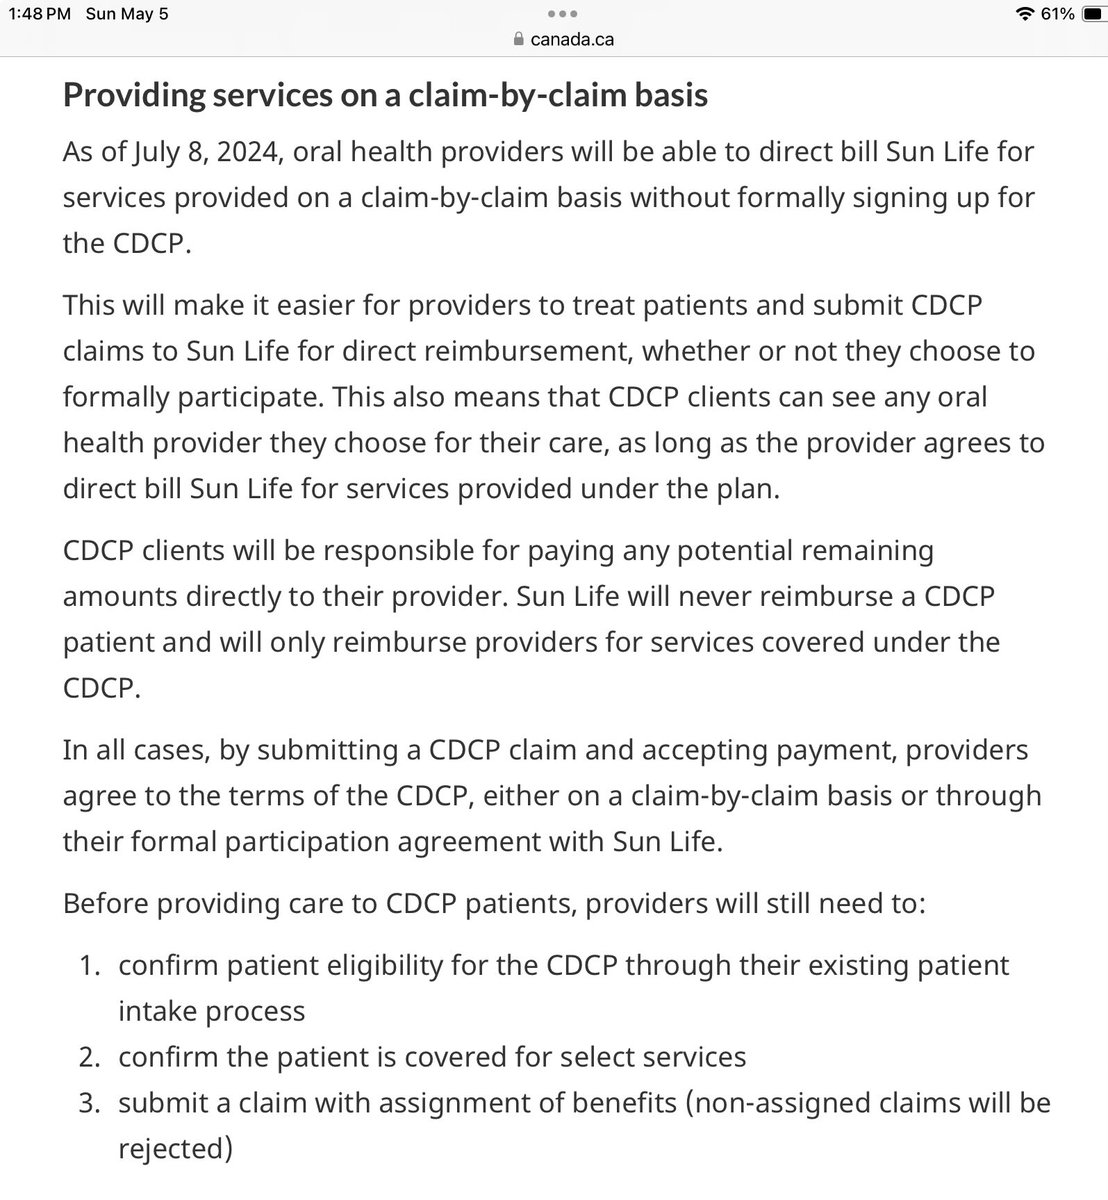 Have seen posts about Dentists not wanting to sign up for the Federal Dental Plan due to paperwork involved. Fear not, as of July 8th the Liberals have made it easier for patients & Dentists. Dentists will no longer will have to formally sign up for the program to provide care.